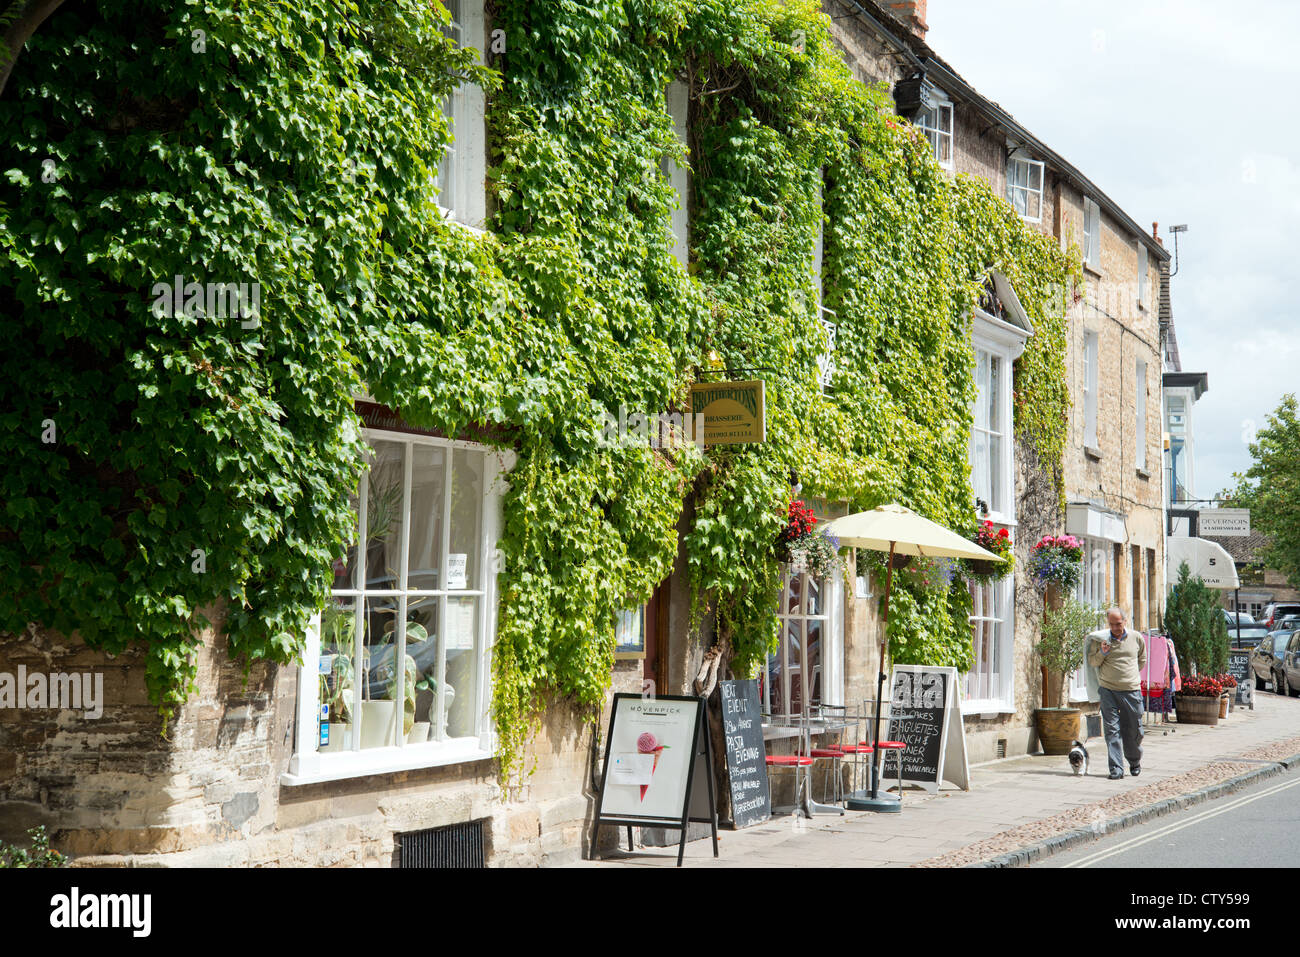 Brothertons Brasserie, High Street, Woodstock, Oxfordshire, Angleterre, Royaume-Uni Banque D'Images